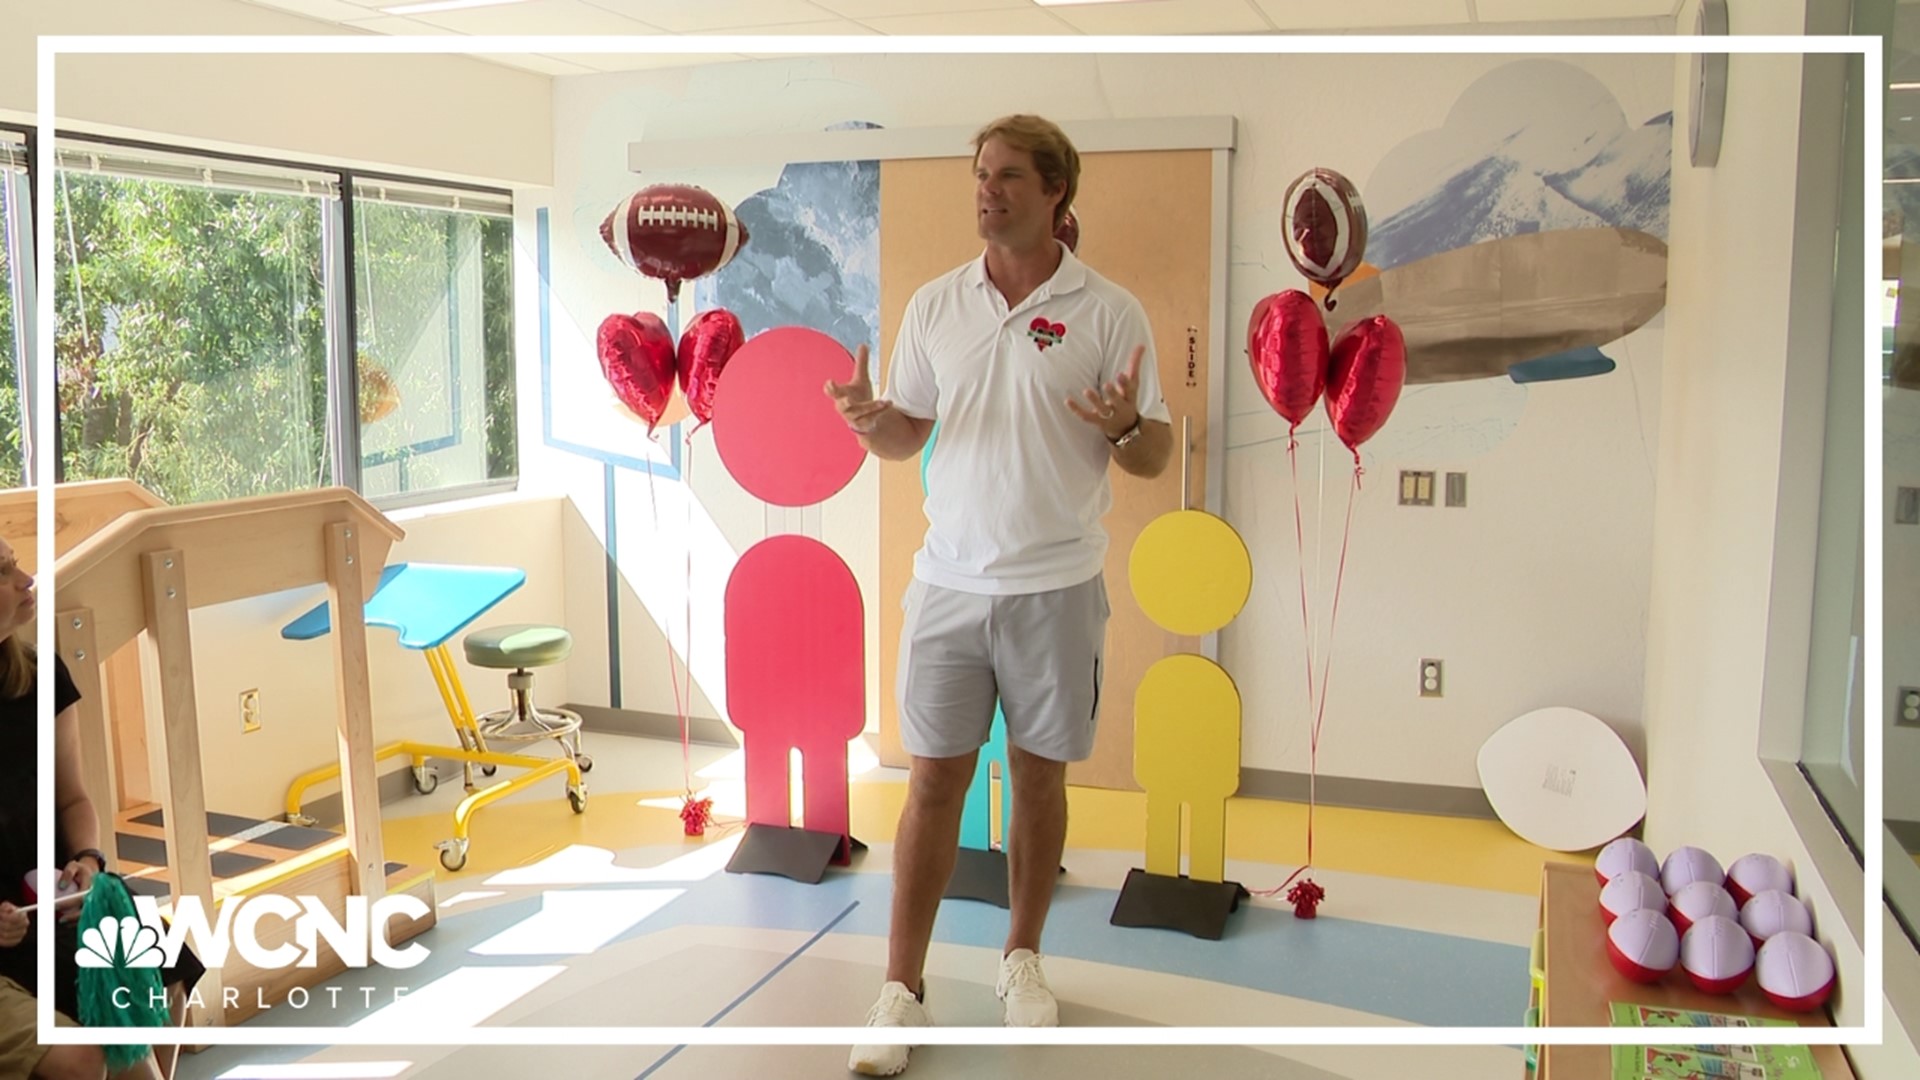 Former Carolina Panthers tight end Greg Olsen donated $2.5 million to Levine Children's Hospital to advance cardiac care, something close to his family.